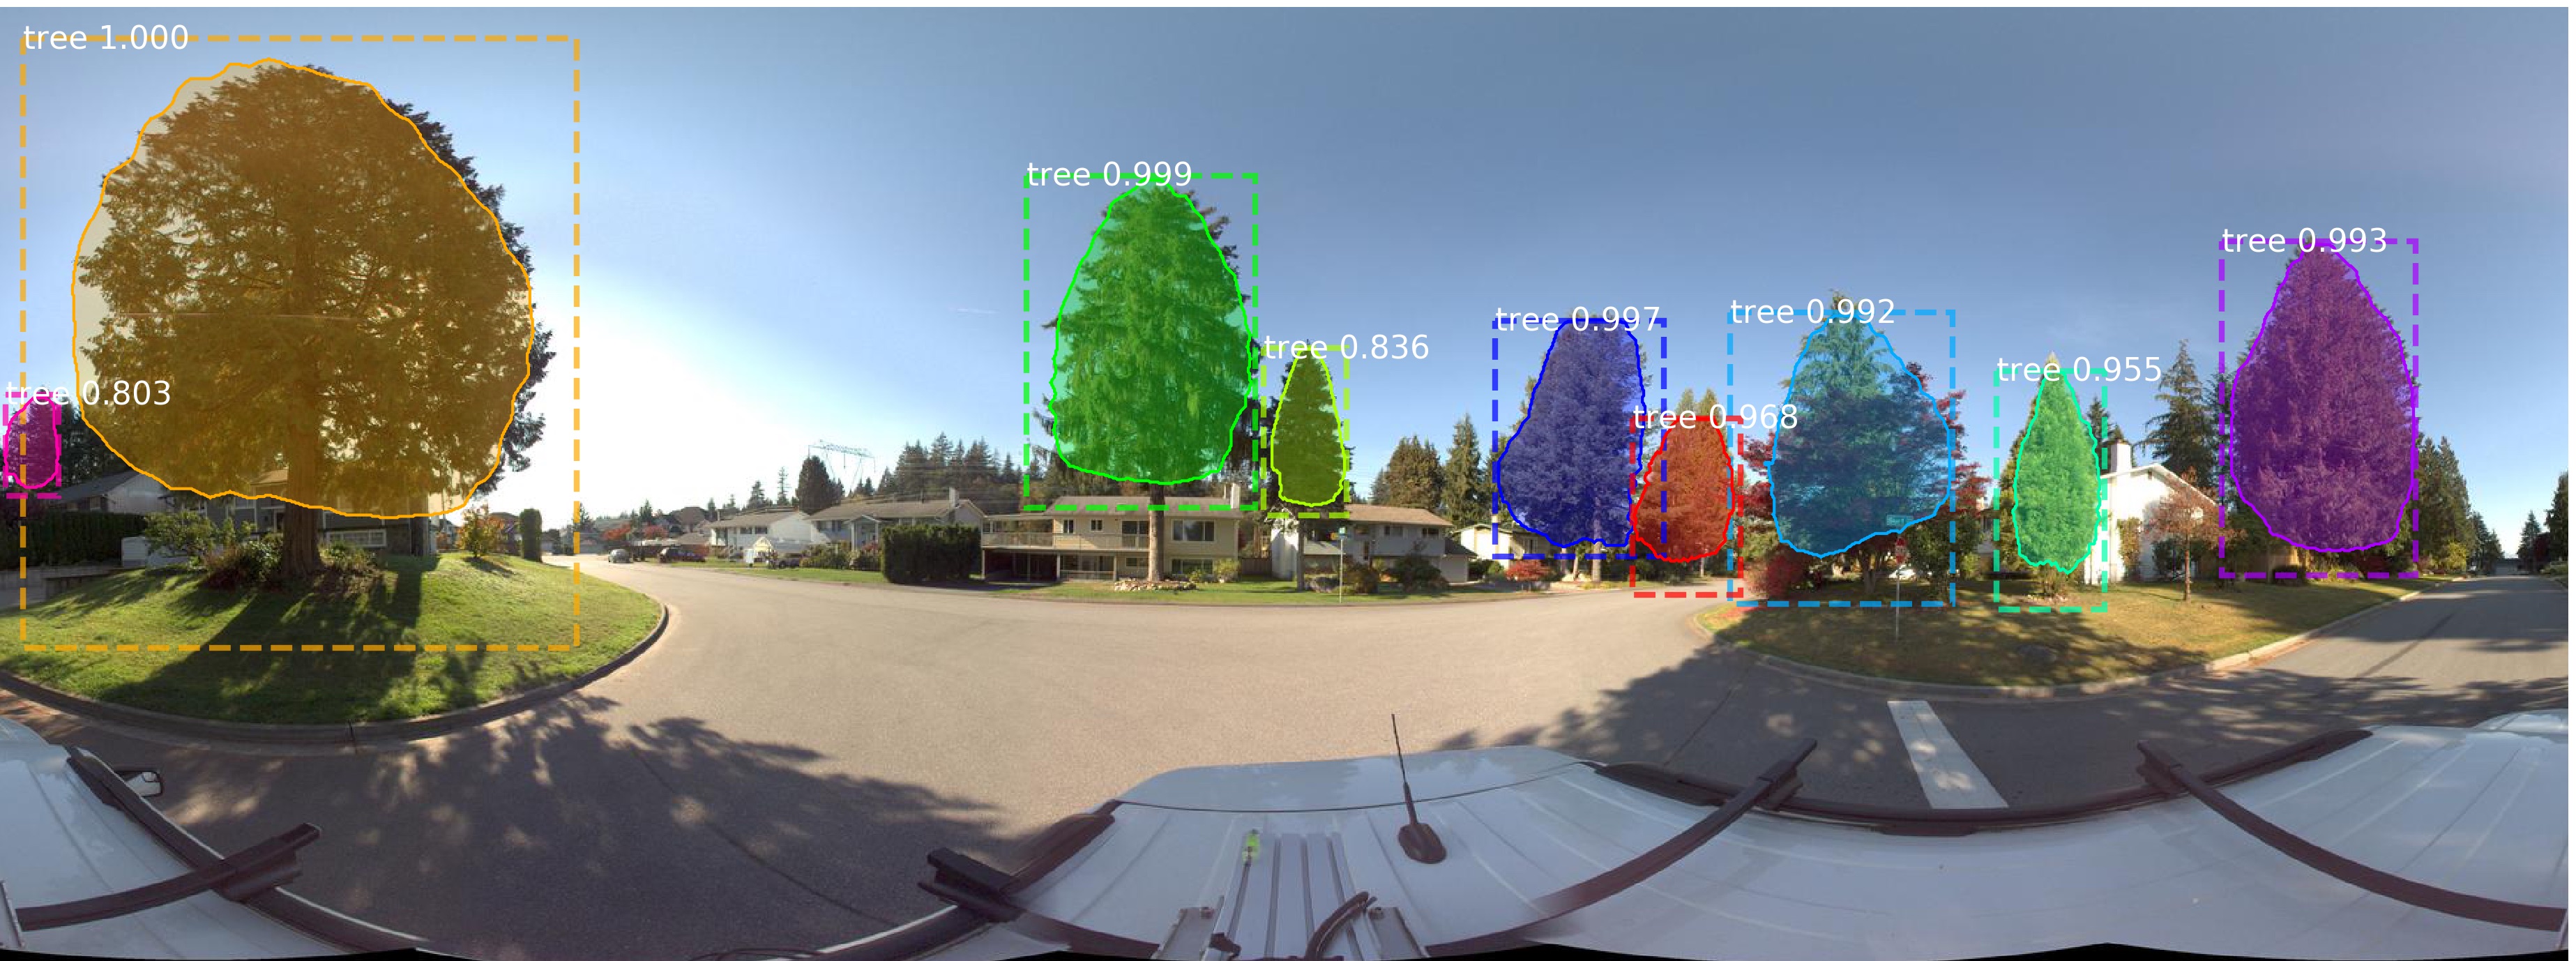 Identifying trees with computer vision